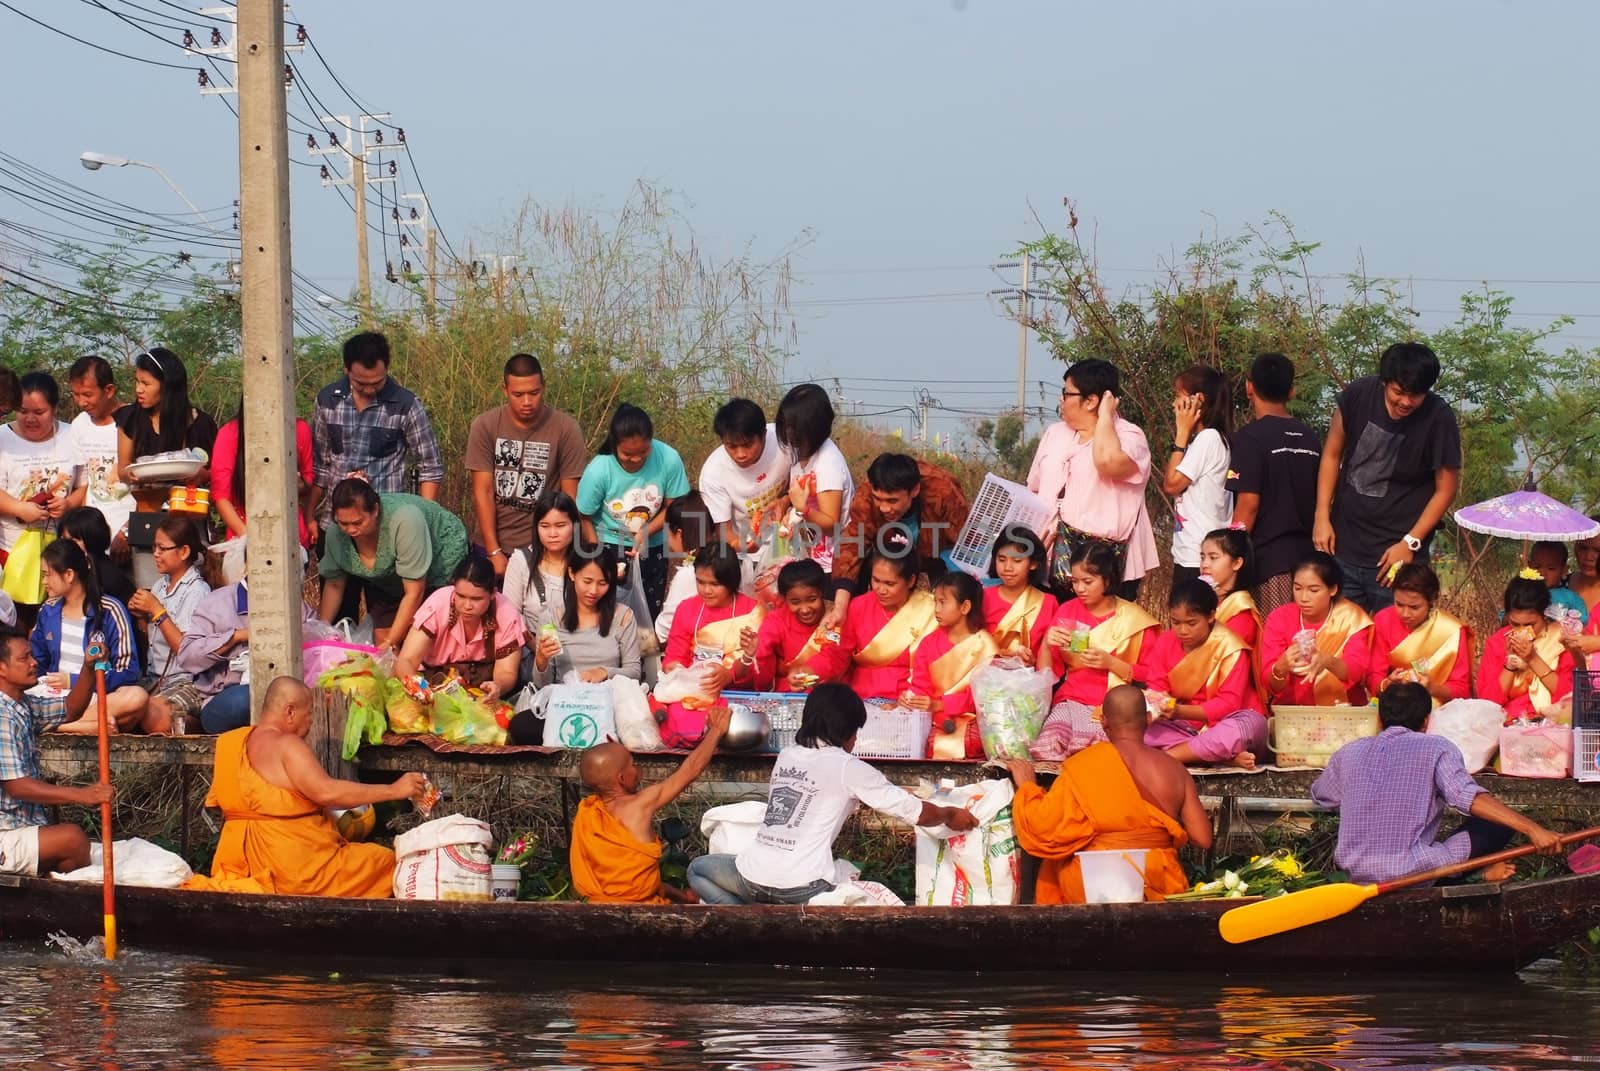 Tuk baat Phra Roi River Festival by ideation90